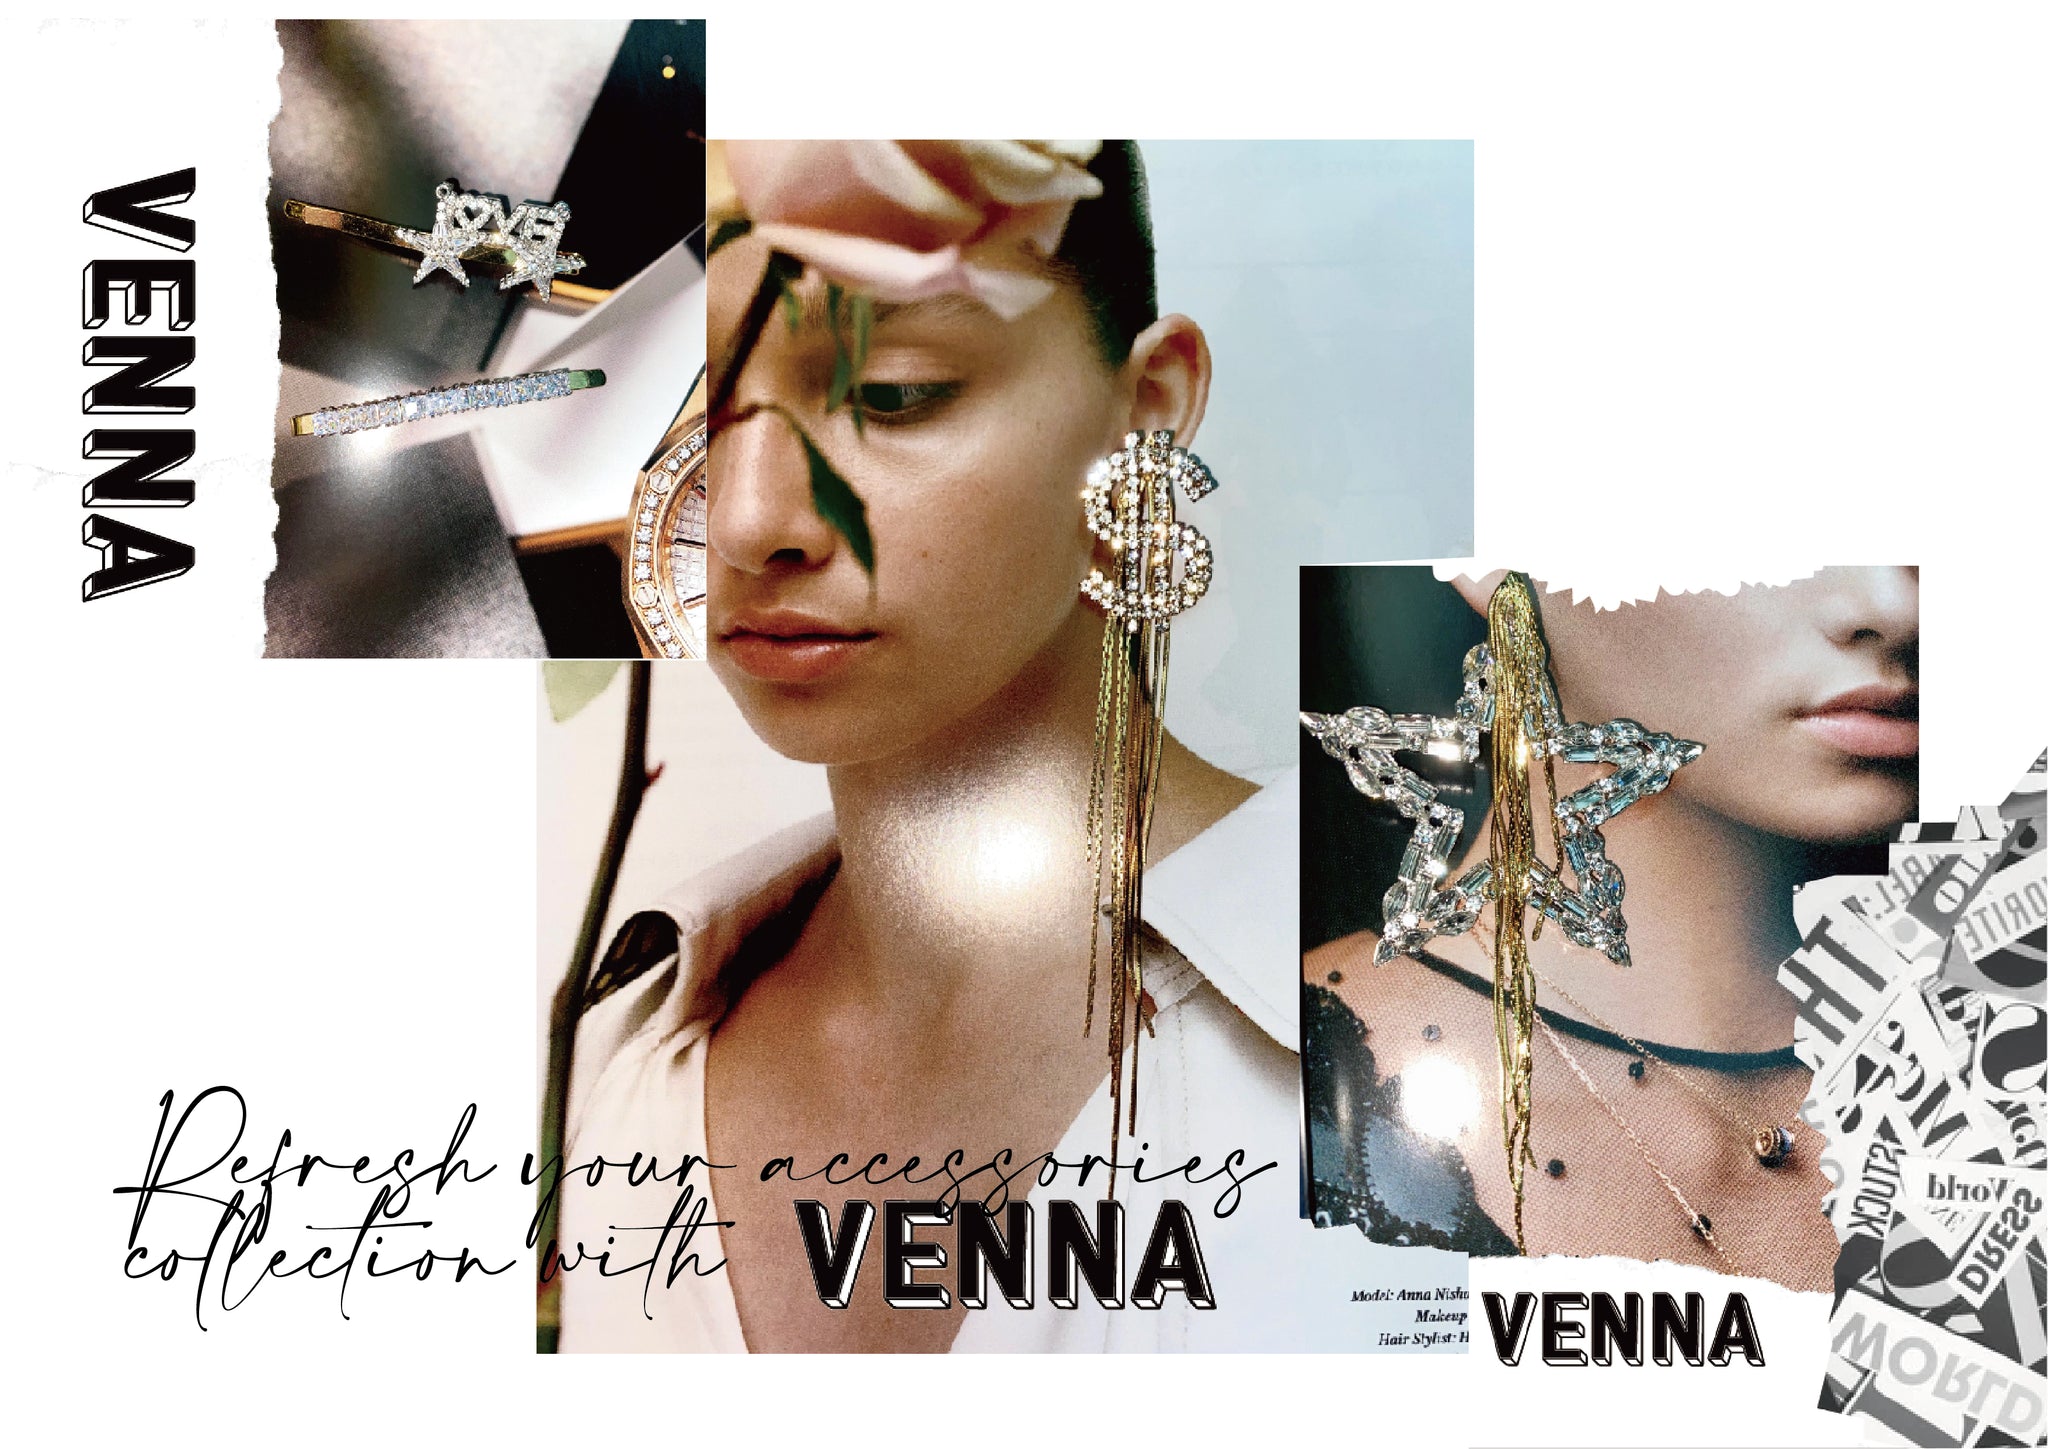 Refresh your accessories collection with VENNA